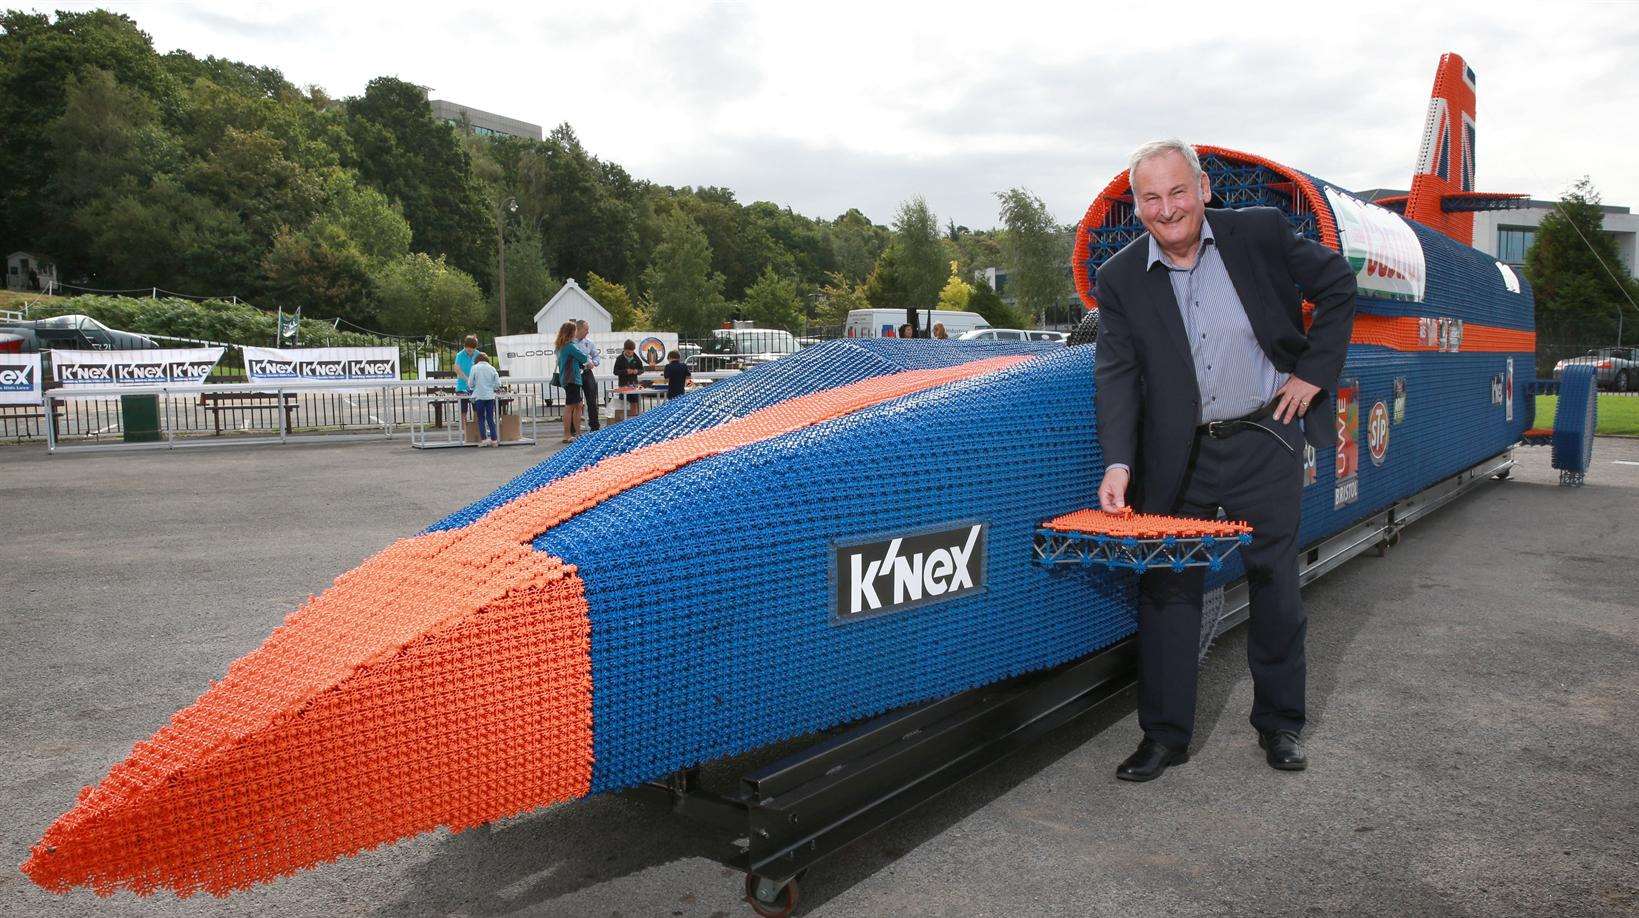 Bloodhound Project Director and current land speed record holder, Richard Noble, officially unveils a life-sized replica of the 42 foot-long Bloodhound supersonic car